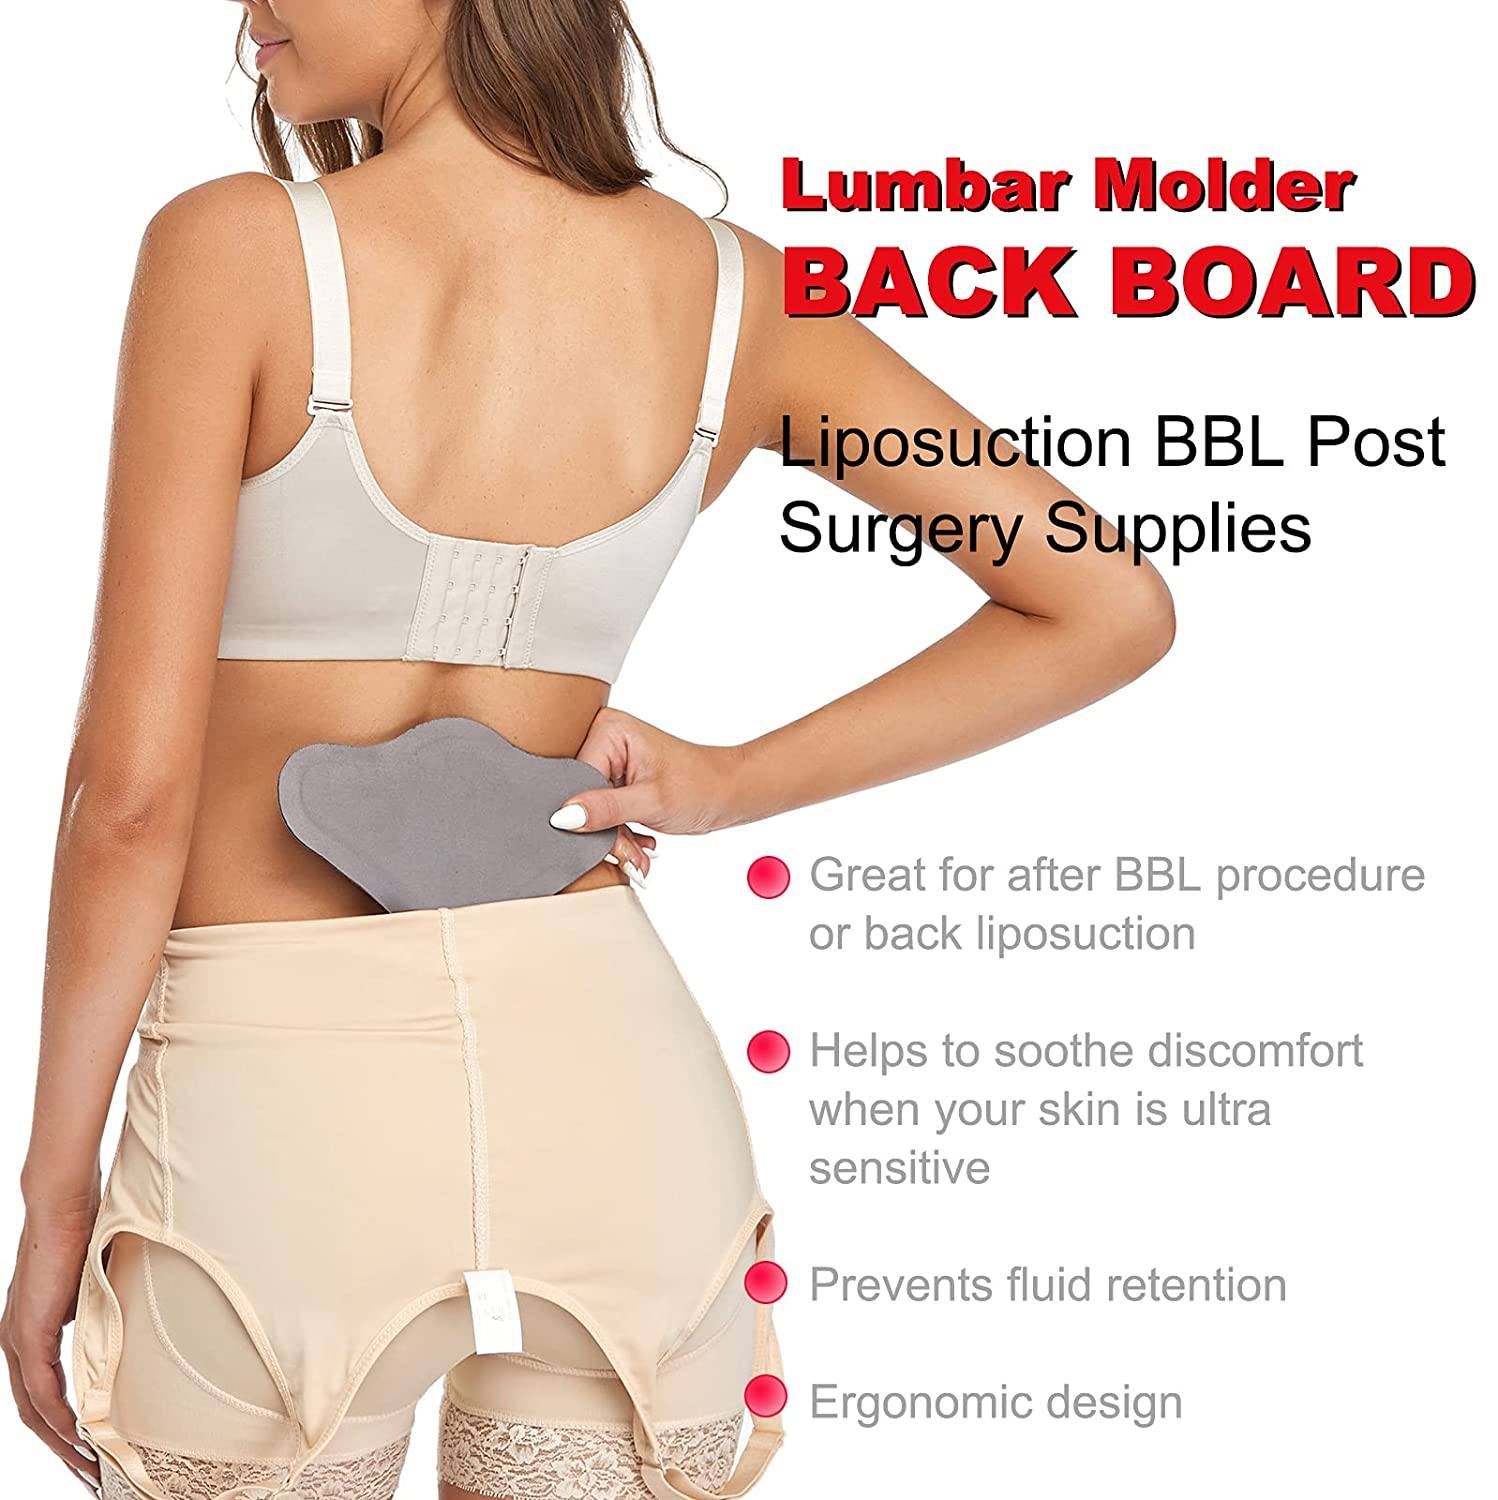 M&D BBL Lumbar Molder Back Compression Liposuction Board Post Surgery  Supplies Gray 3 Count (Pack of